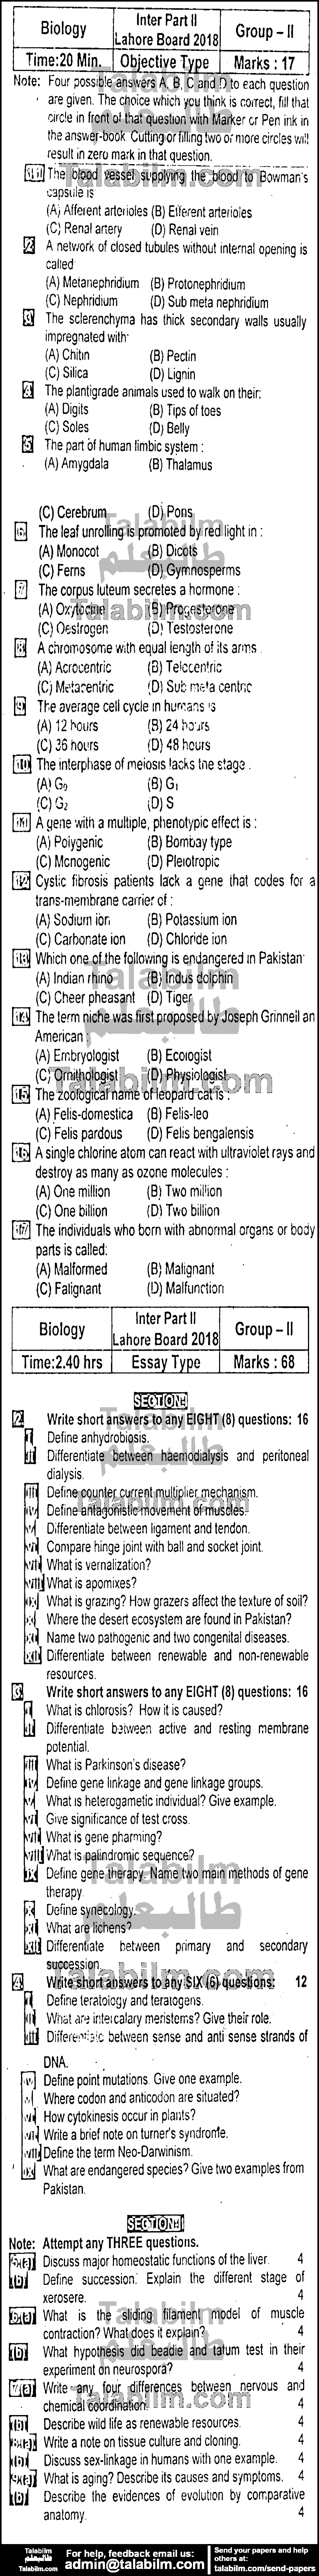 Biology 0 past paper for Group-II 2018